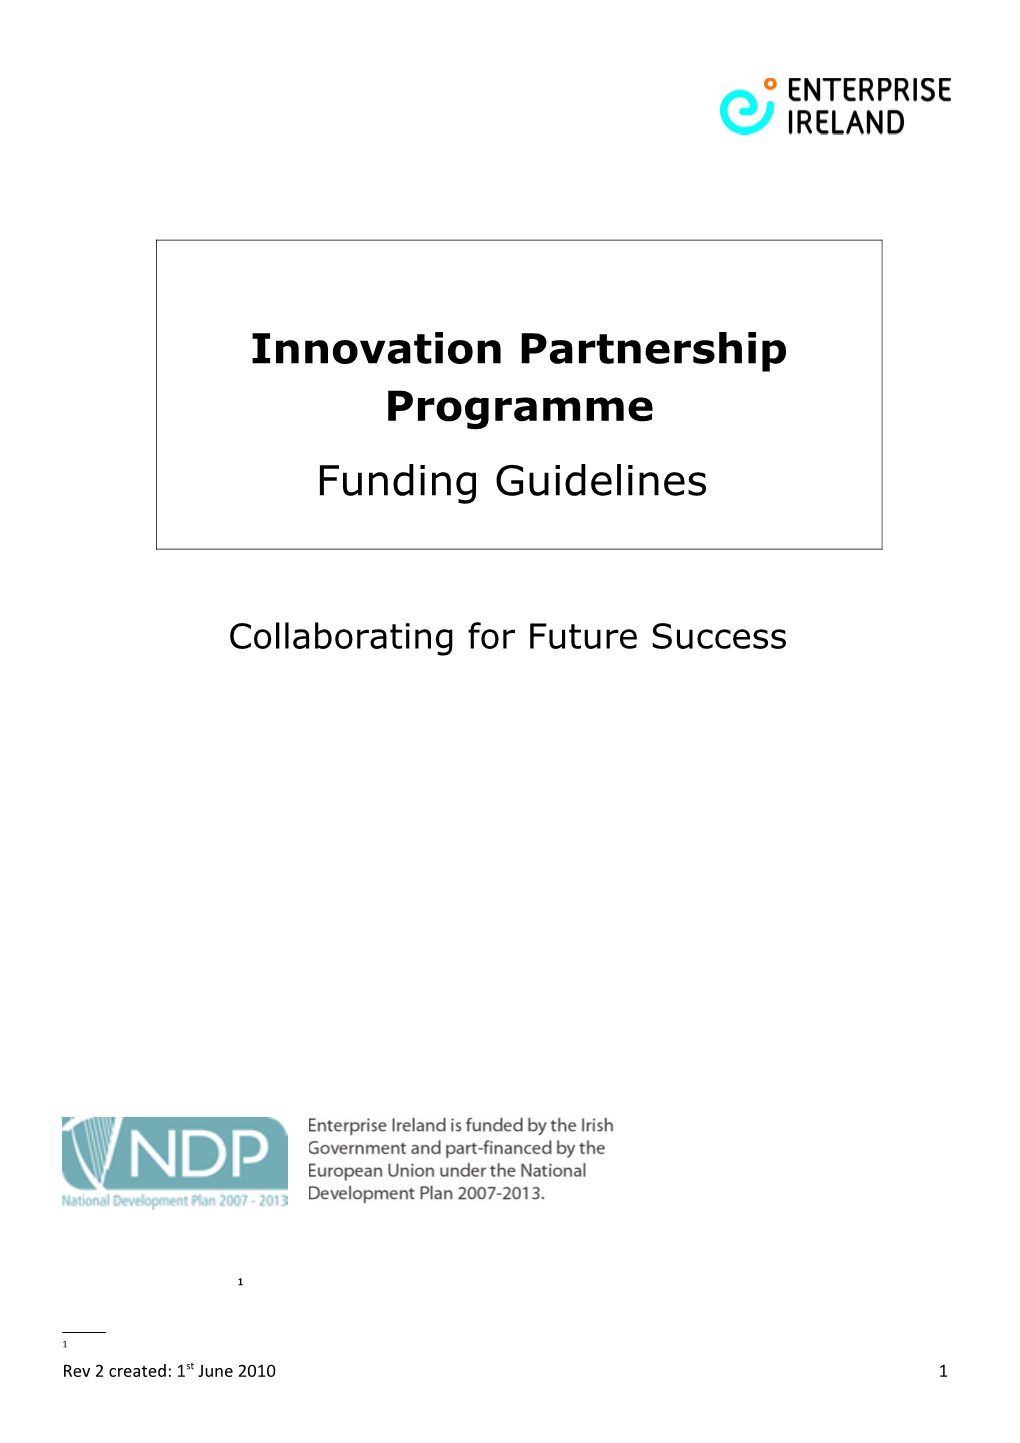 New Innovation Partnership Programme Funding Levels Under State Aid Guidelines